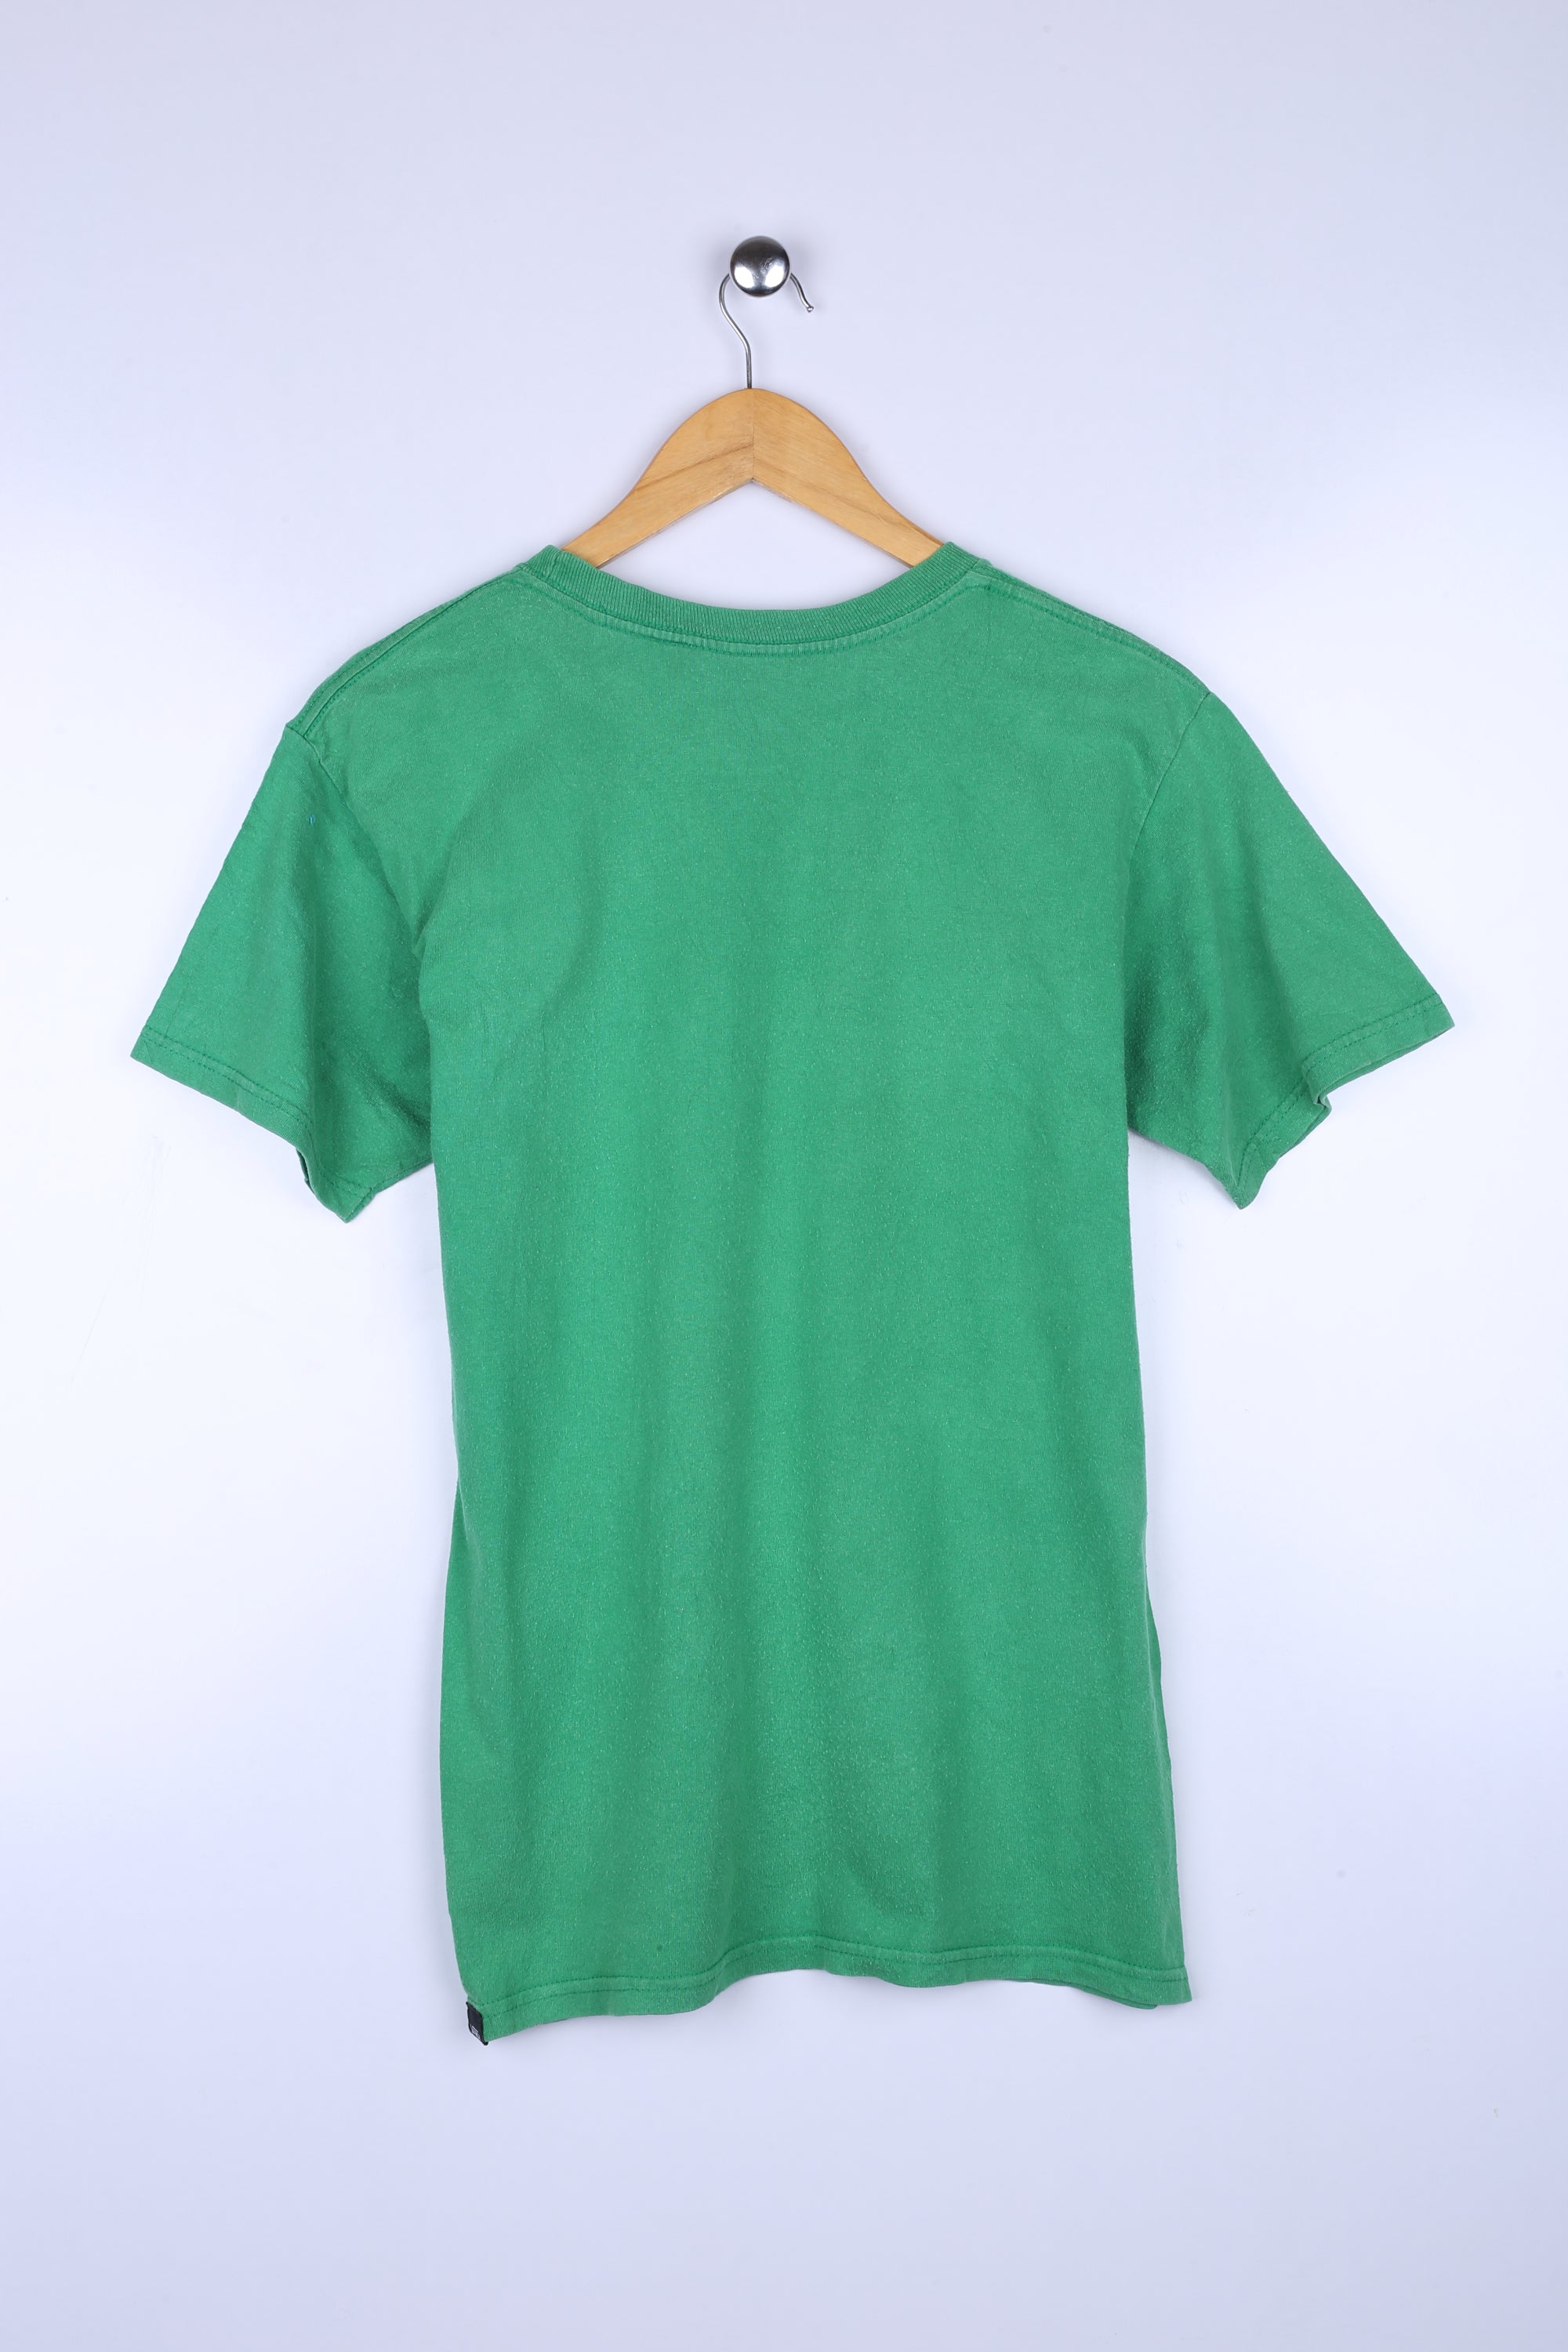 Vintage Vans Graphic Tee Green Small